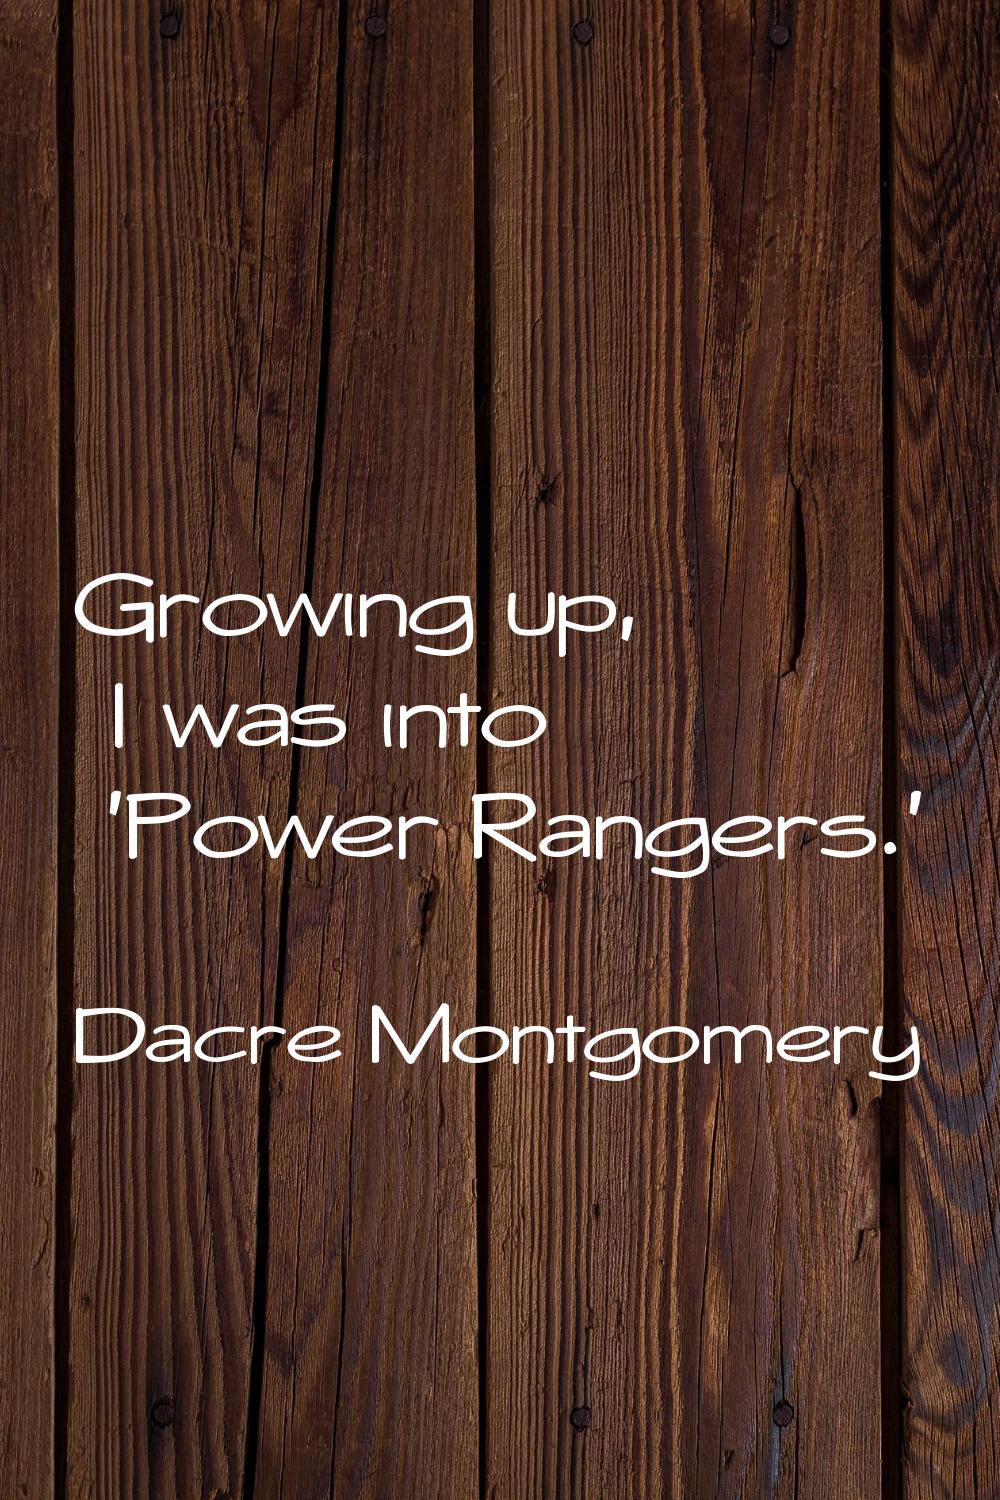 Growing up, I was into 'Power Rangers.'